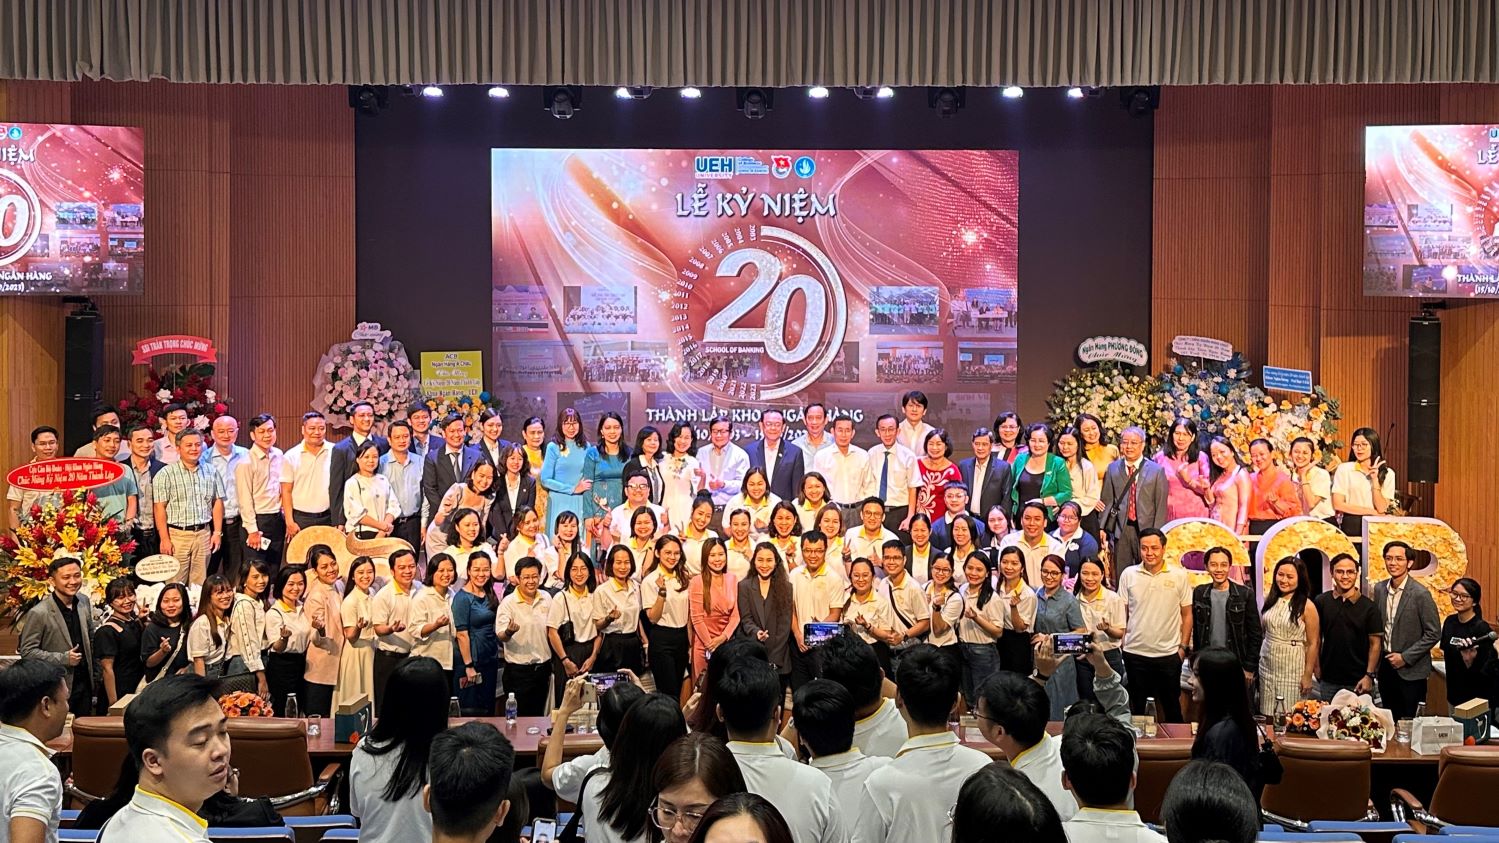 20th Anniversary of the School of Banking, College of Business, University of Economics Ho Chi Minh City

